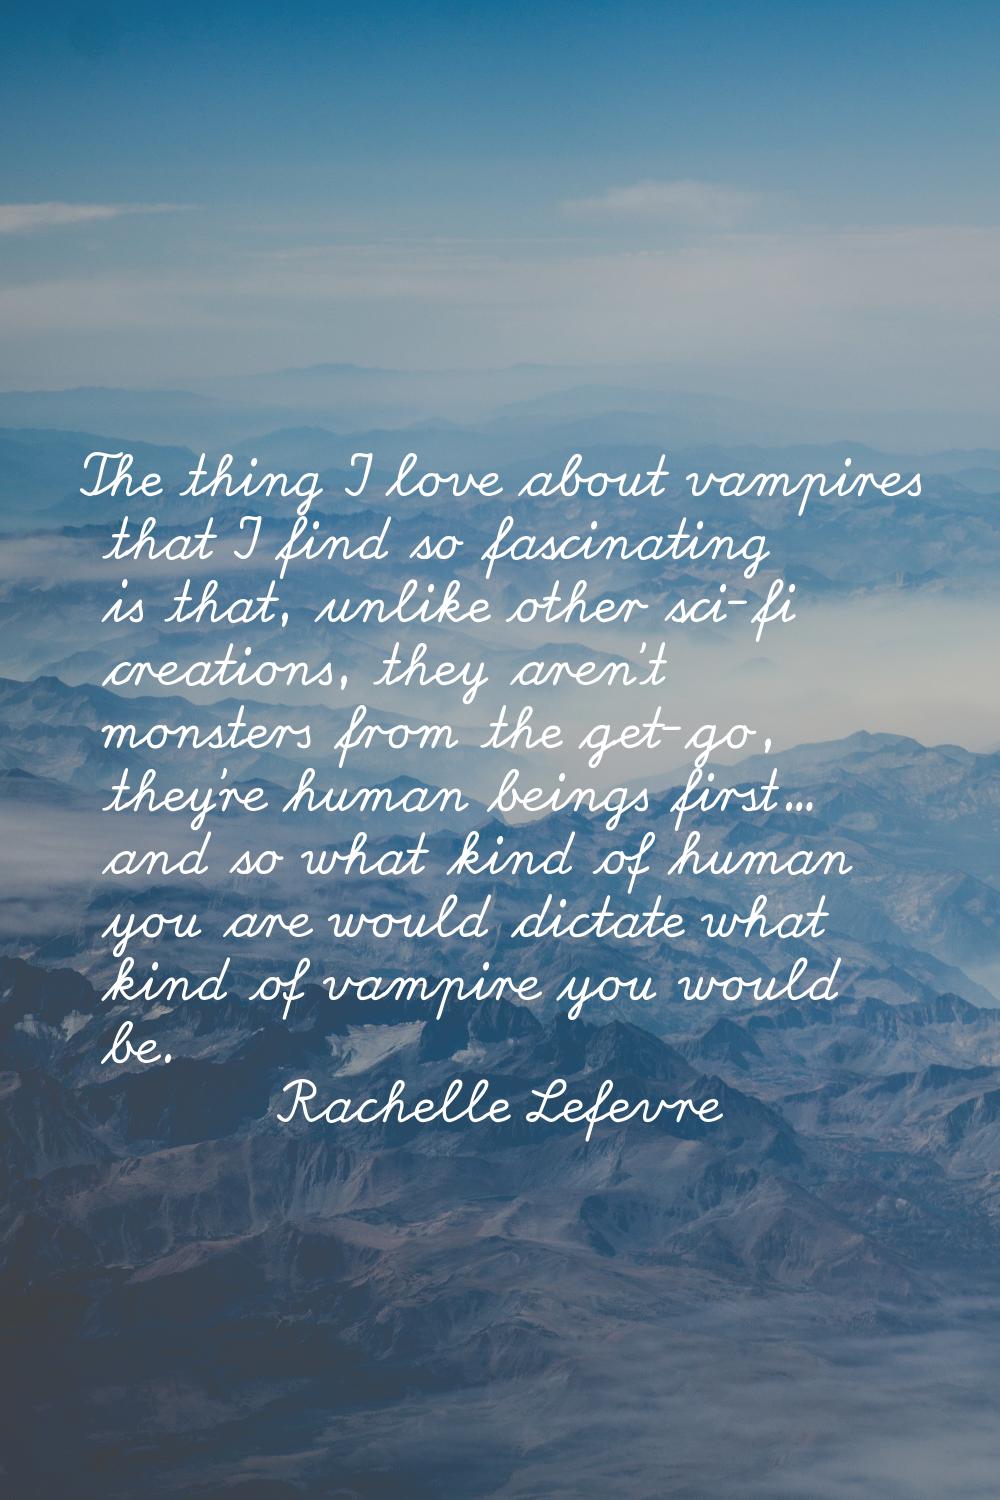 The thing I love about vampires that I find so fascinating is that, unlike other sci-fi creations, 